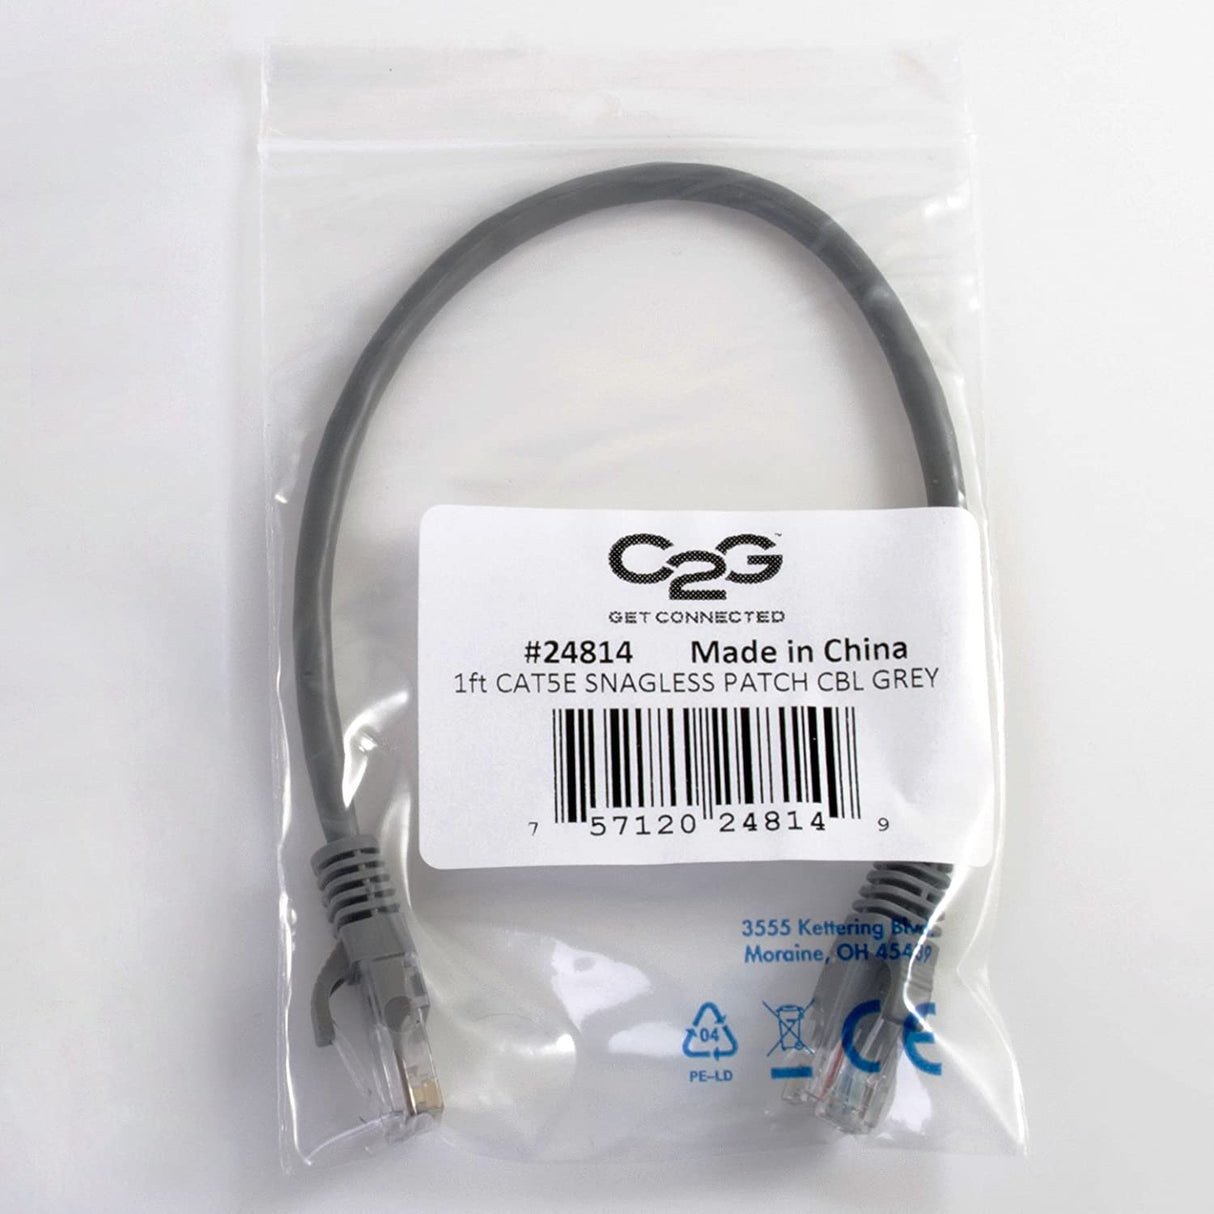 C2g/ cables to go C2G/Cables to Go 00482 Cat5e Snagless Unshielded (UTP) Network Patch Cable 12 Feet 12 Feet Grey